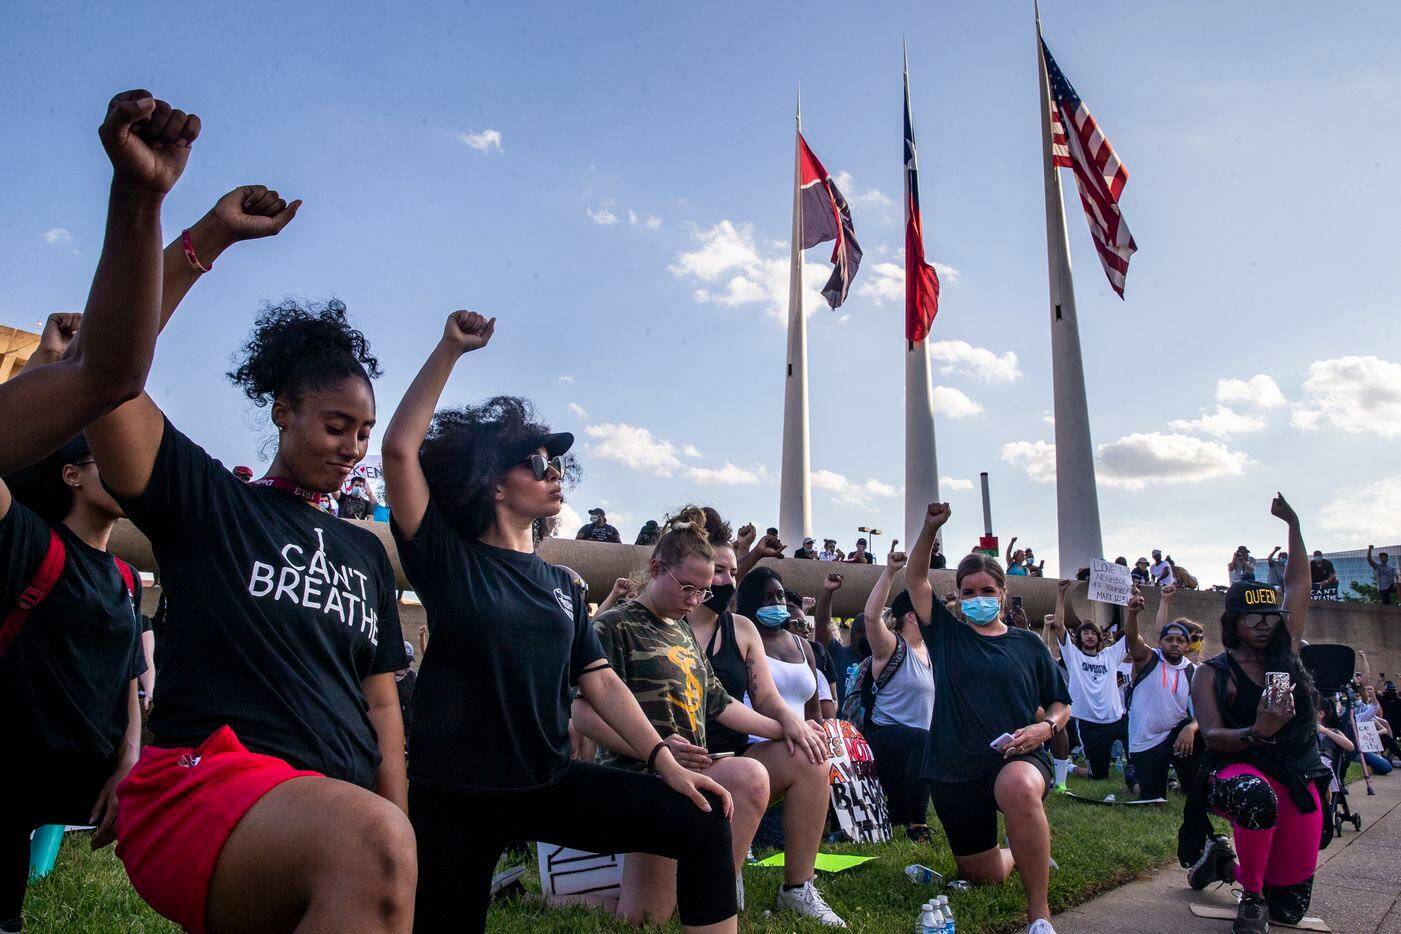 From left, co-organizers Aliyah Russell, Tierra Jenae Giles and other protesters raise their fists while participating in an 8-minute and 46-second kneel in honor of George Floyd during a demonstration at Dallas City Hall to denounce police brutality and systemic racism in Dallas on Thursday, June 4, 2020. The demonstration took place on the seventh consecutive day of organized protests in response to the recent deaths of George Floyd in Minneapolis and Breonna Taylor in Louisville.